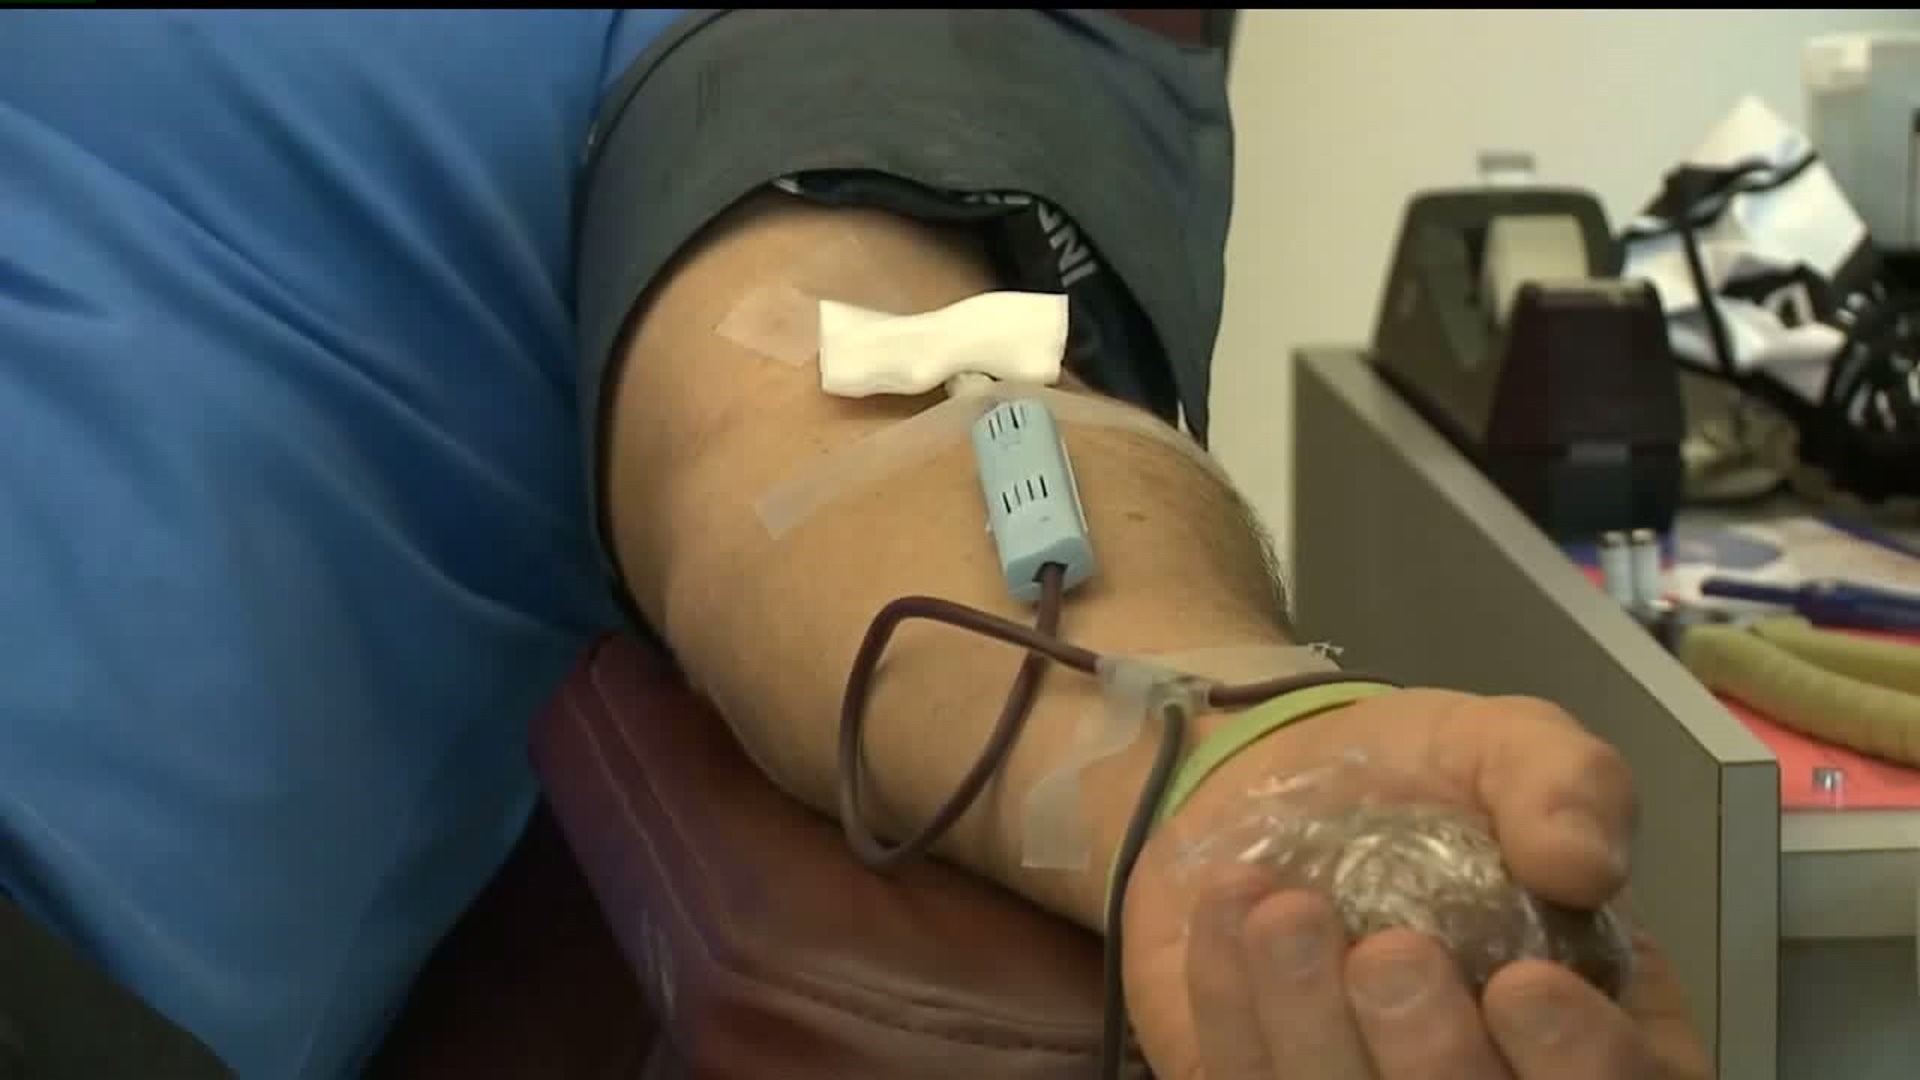 Why you should wait to donate blood